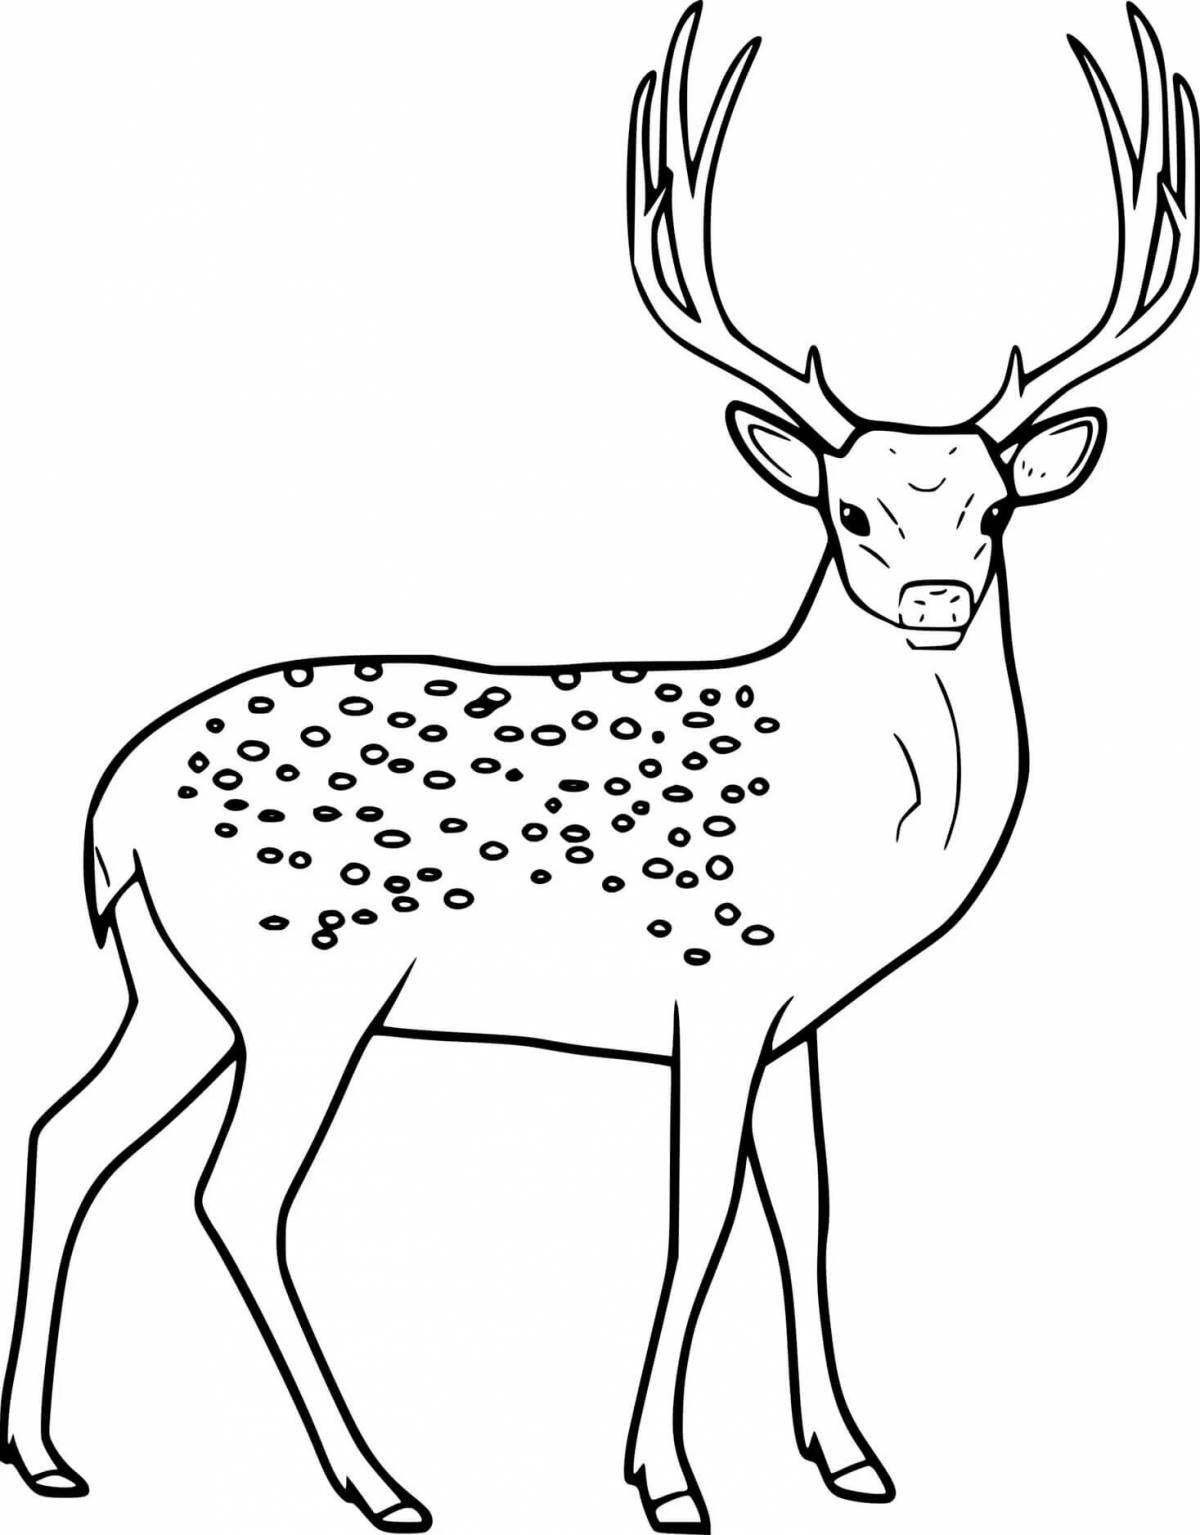 Colourful deer coloring book for children 3-4 years old